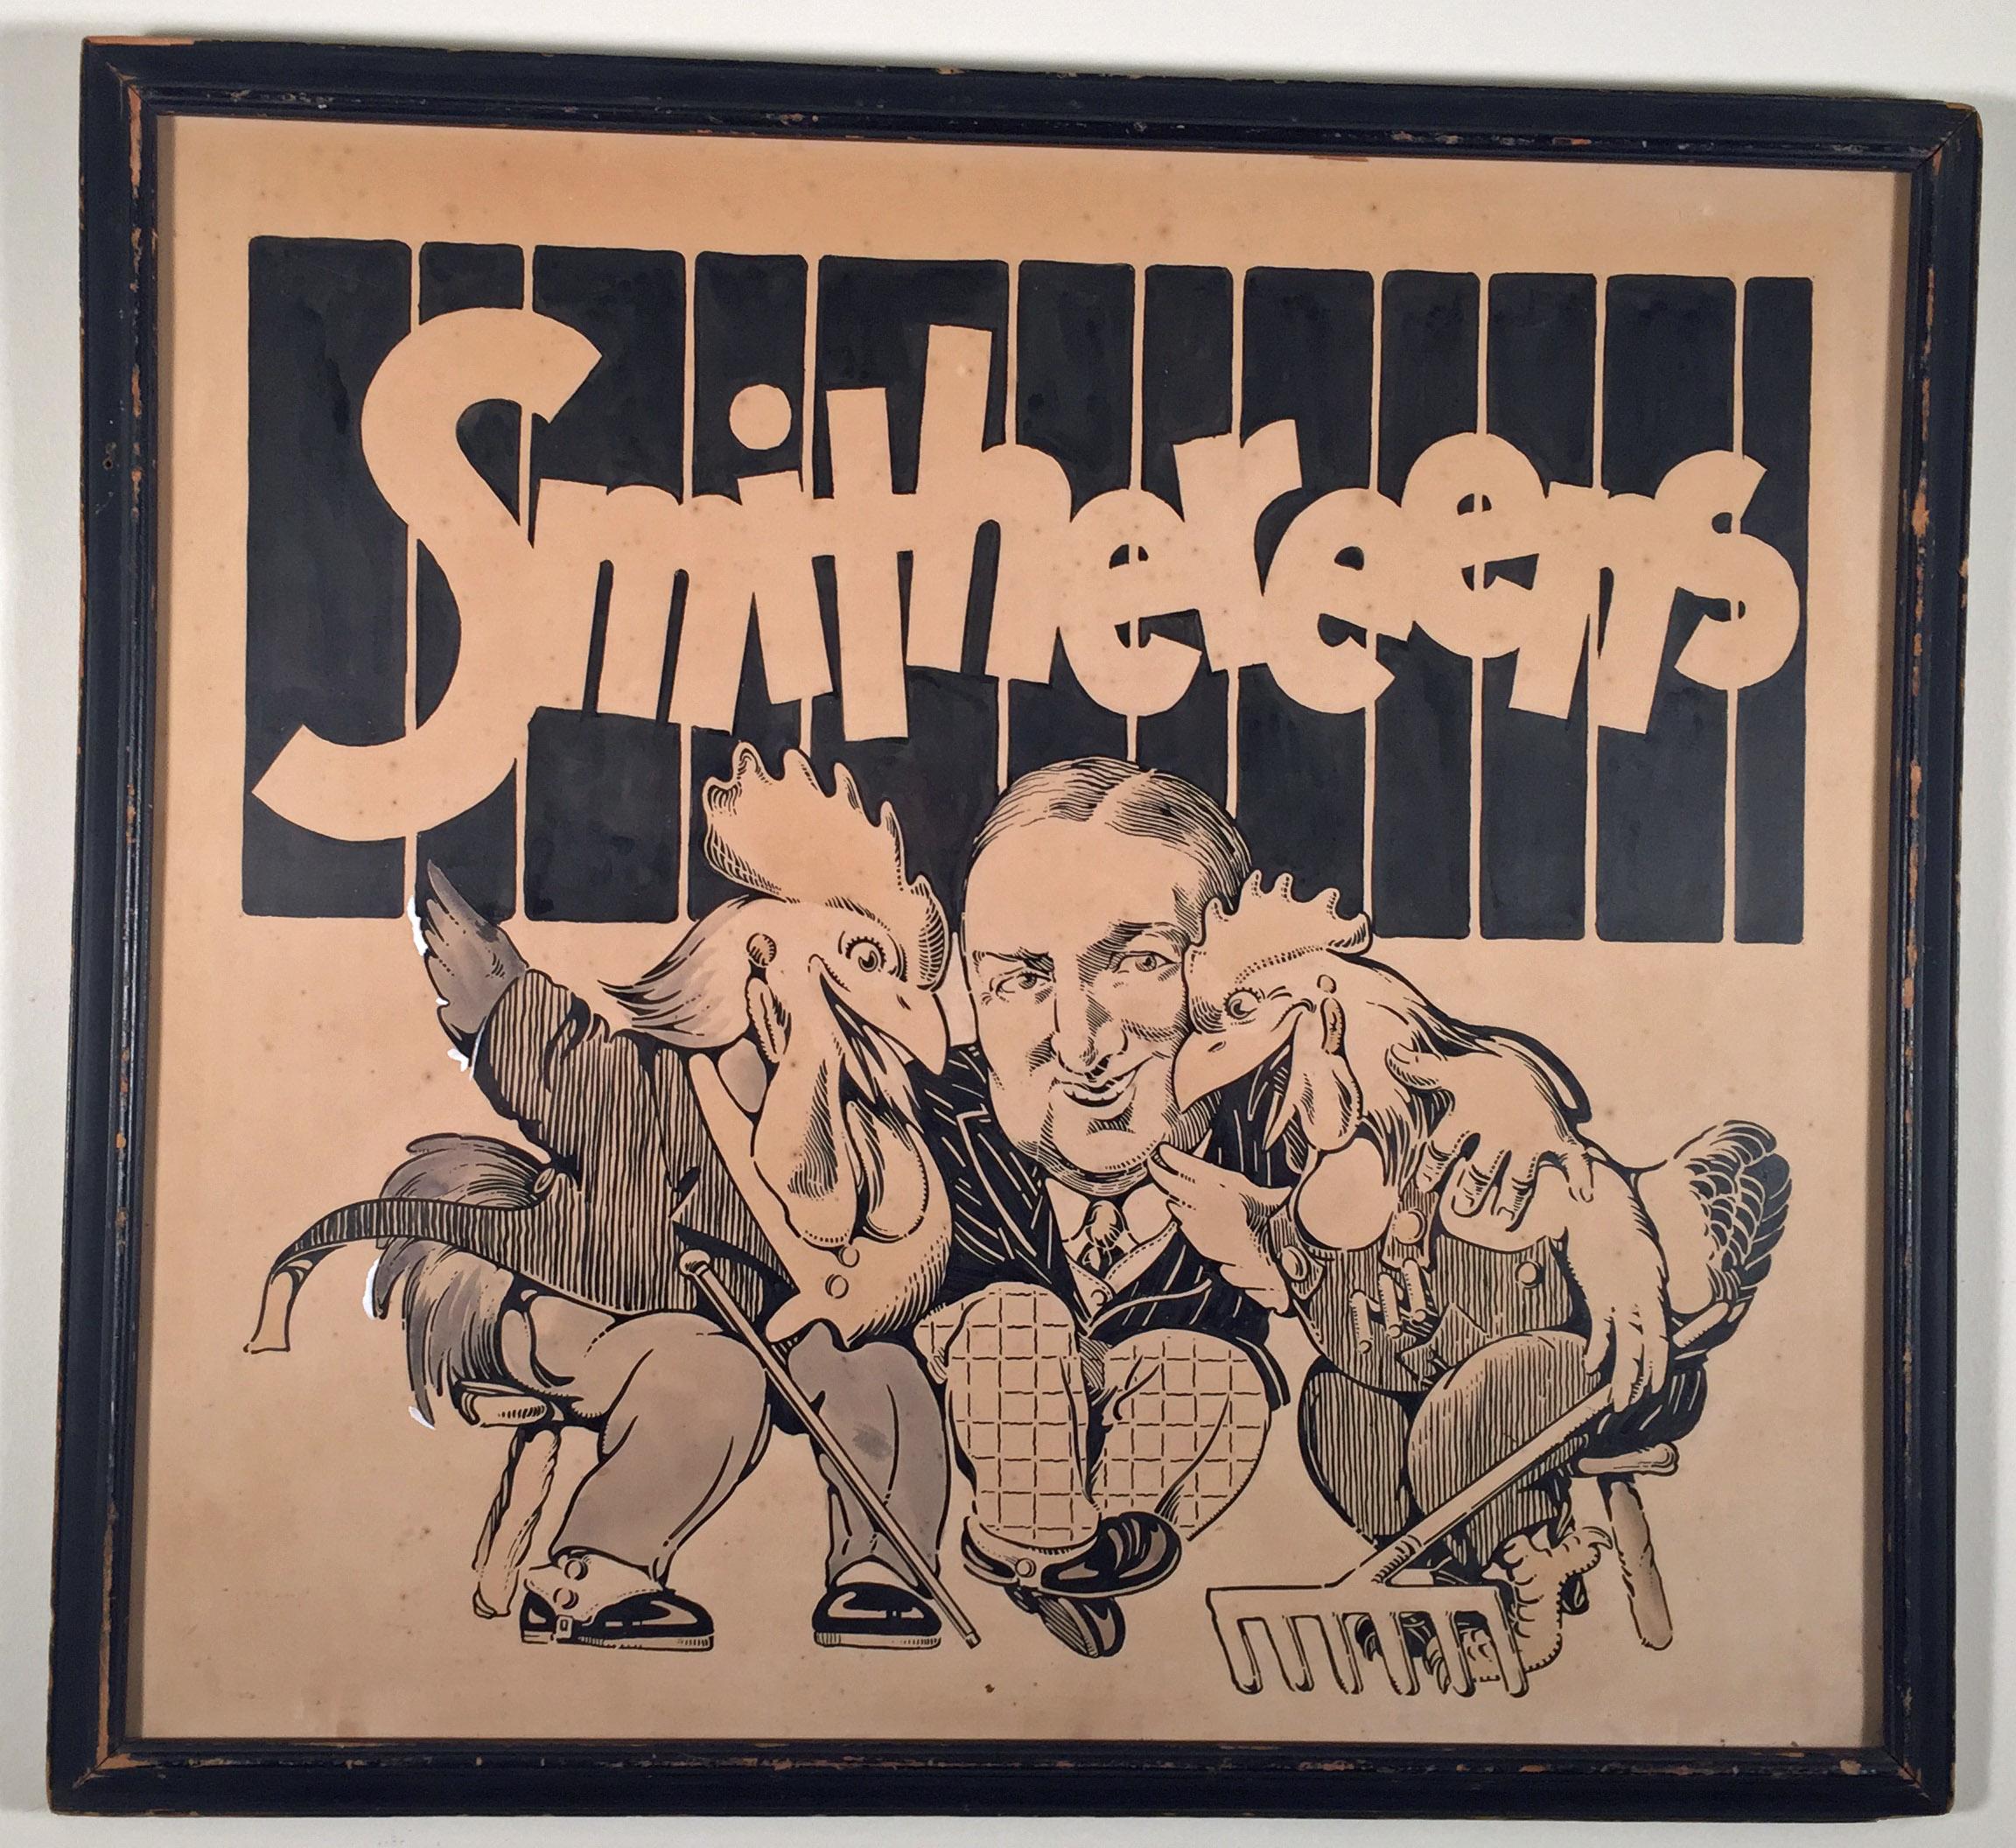 SMITHEREENS - Art by Unknown